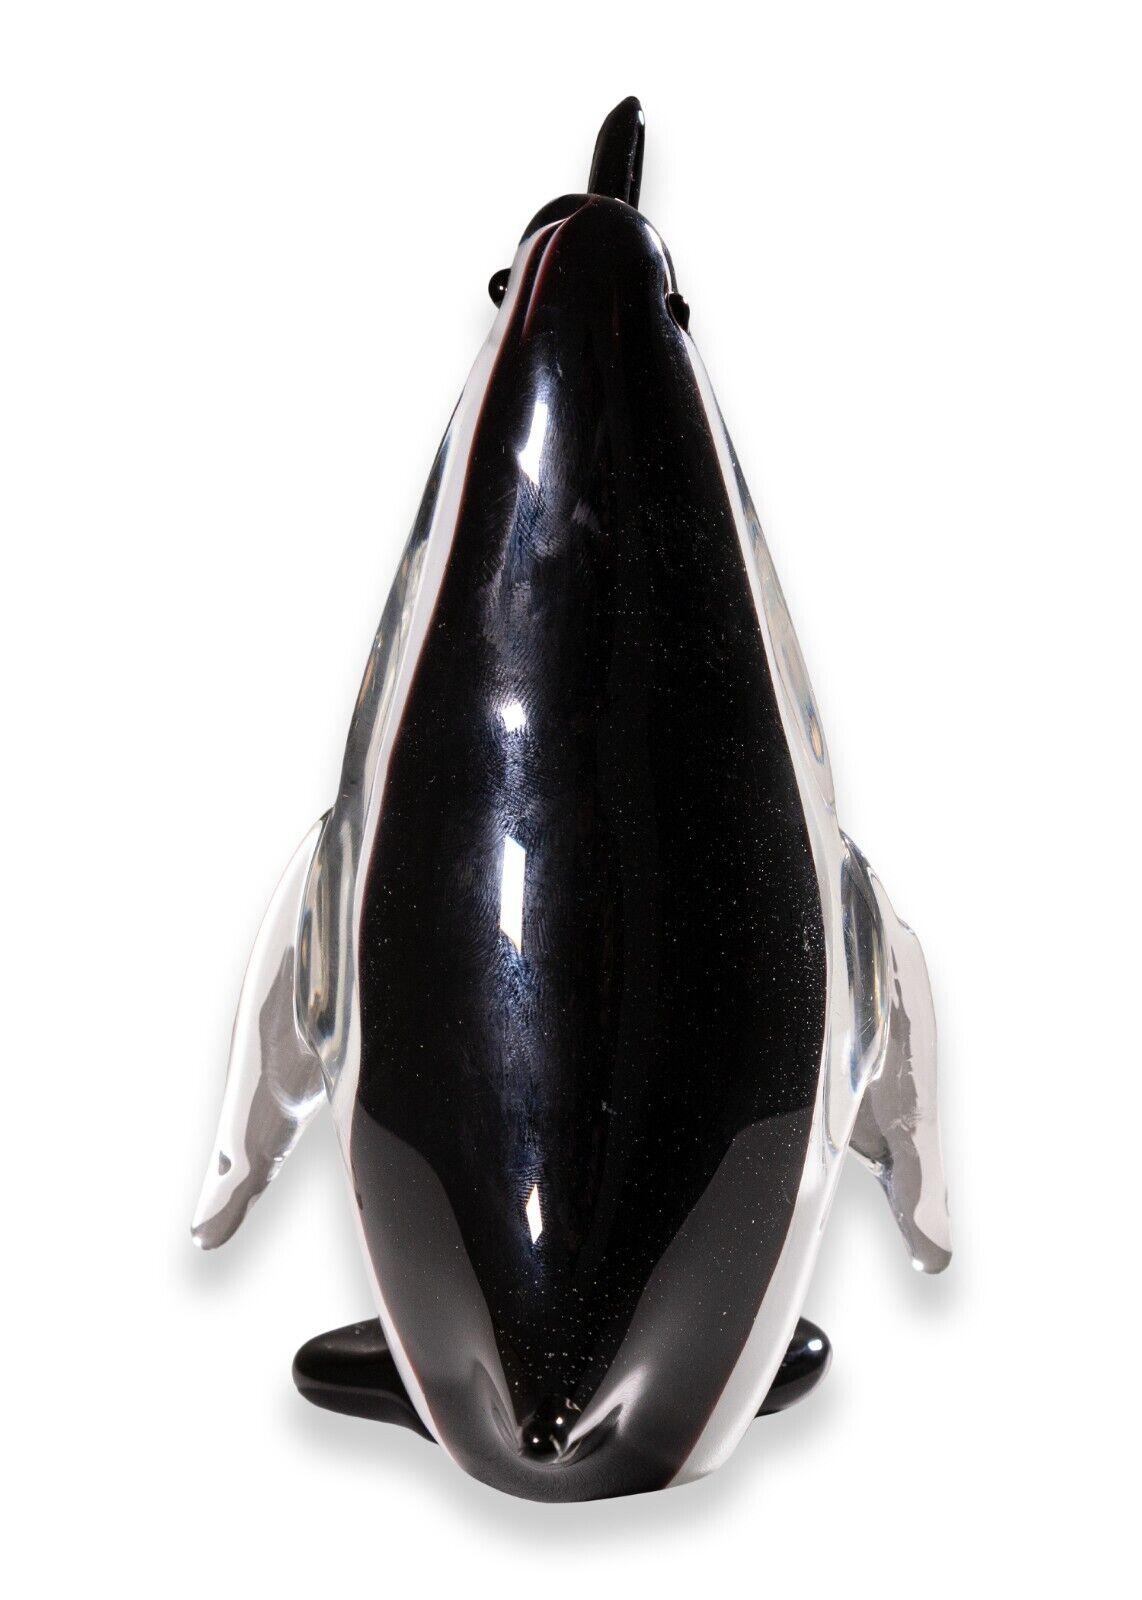 Murano Art Glass Penguin Figurine Sculpture with Original Tag In Good Condition For Sale In Keego Harbor, MI